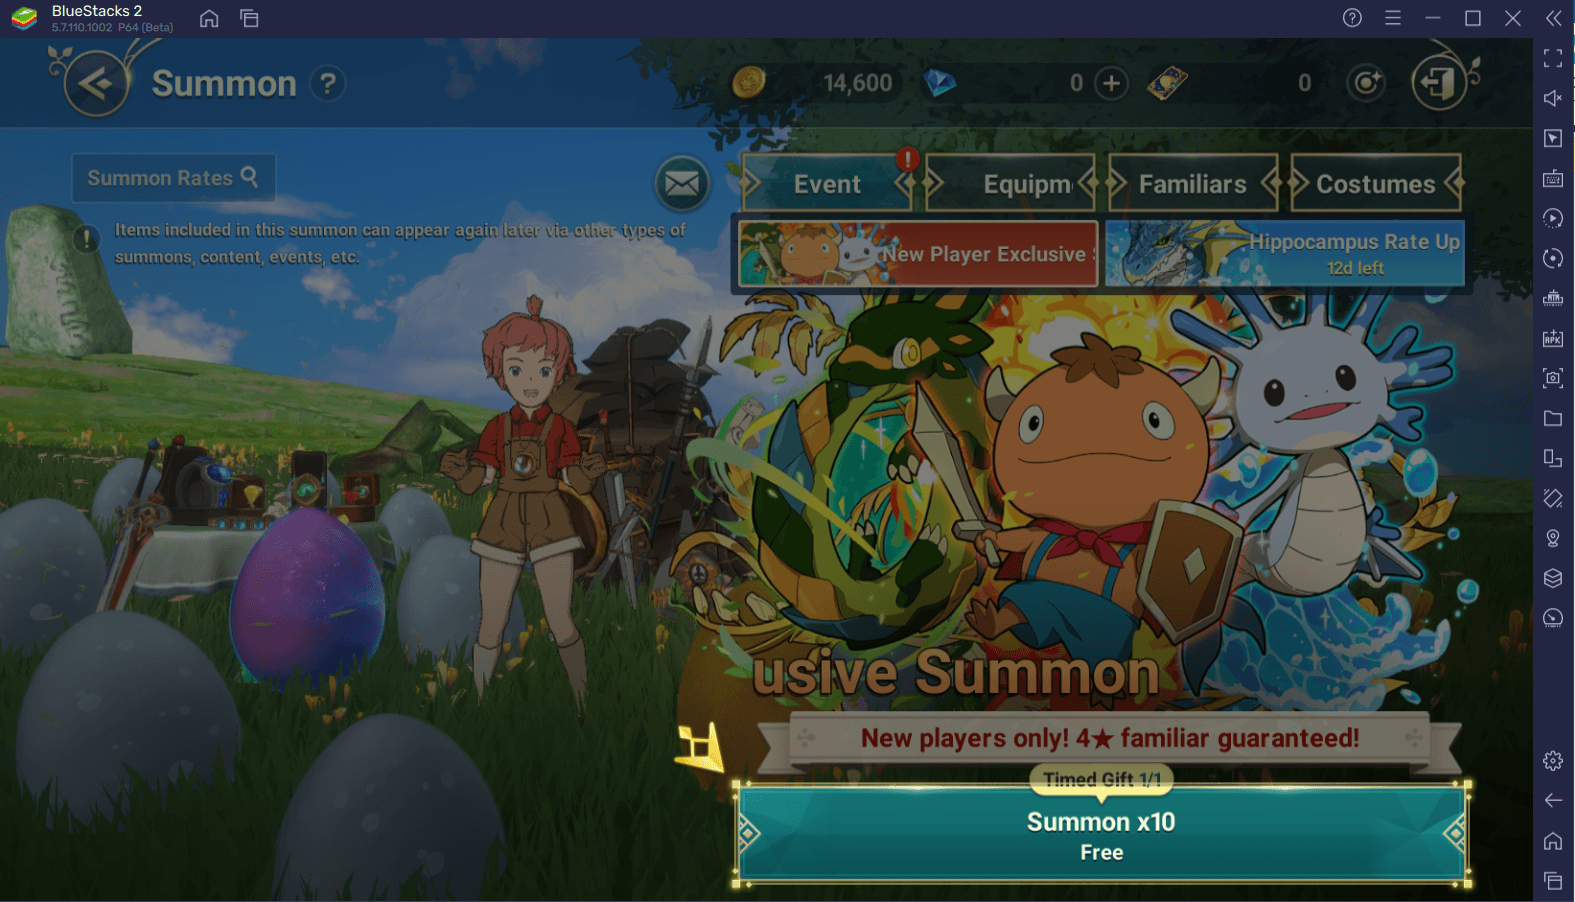 Ni no Kuni: Cross Worlds Equipment Guide – Get Stronger and Increase your CP